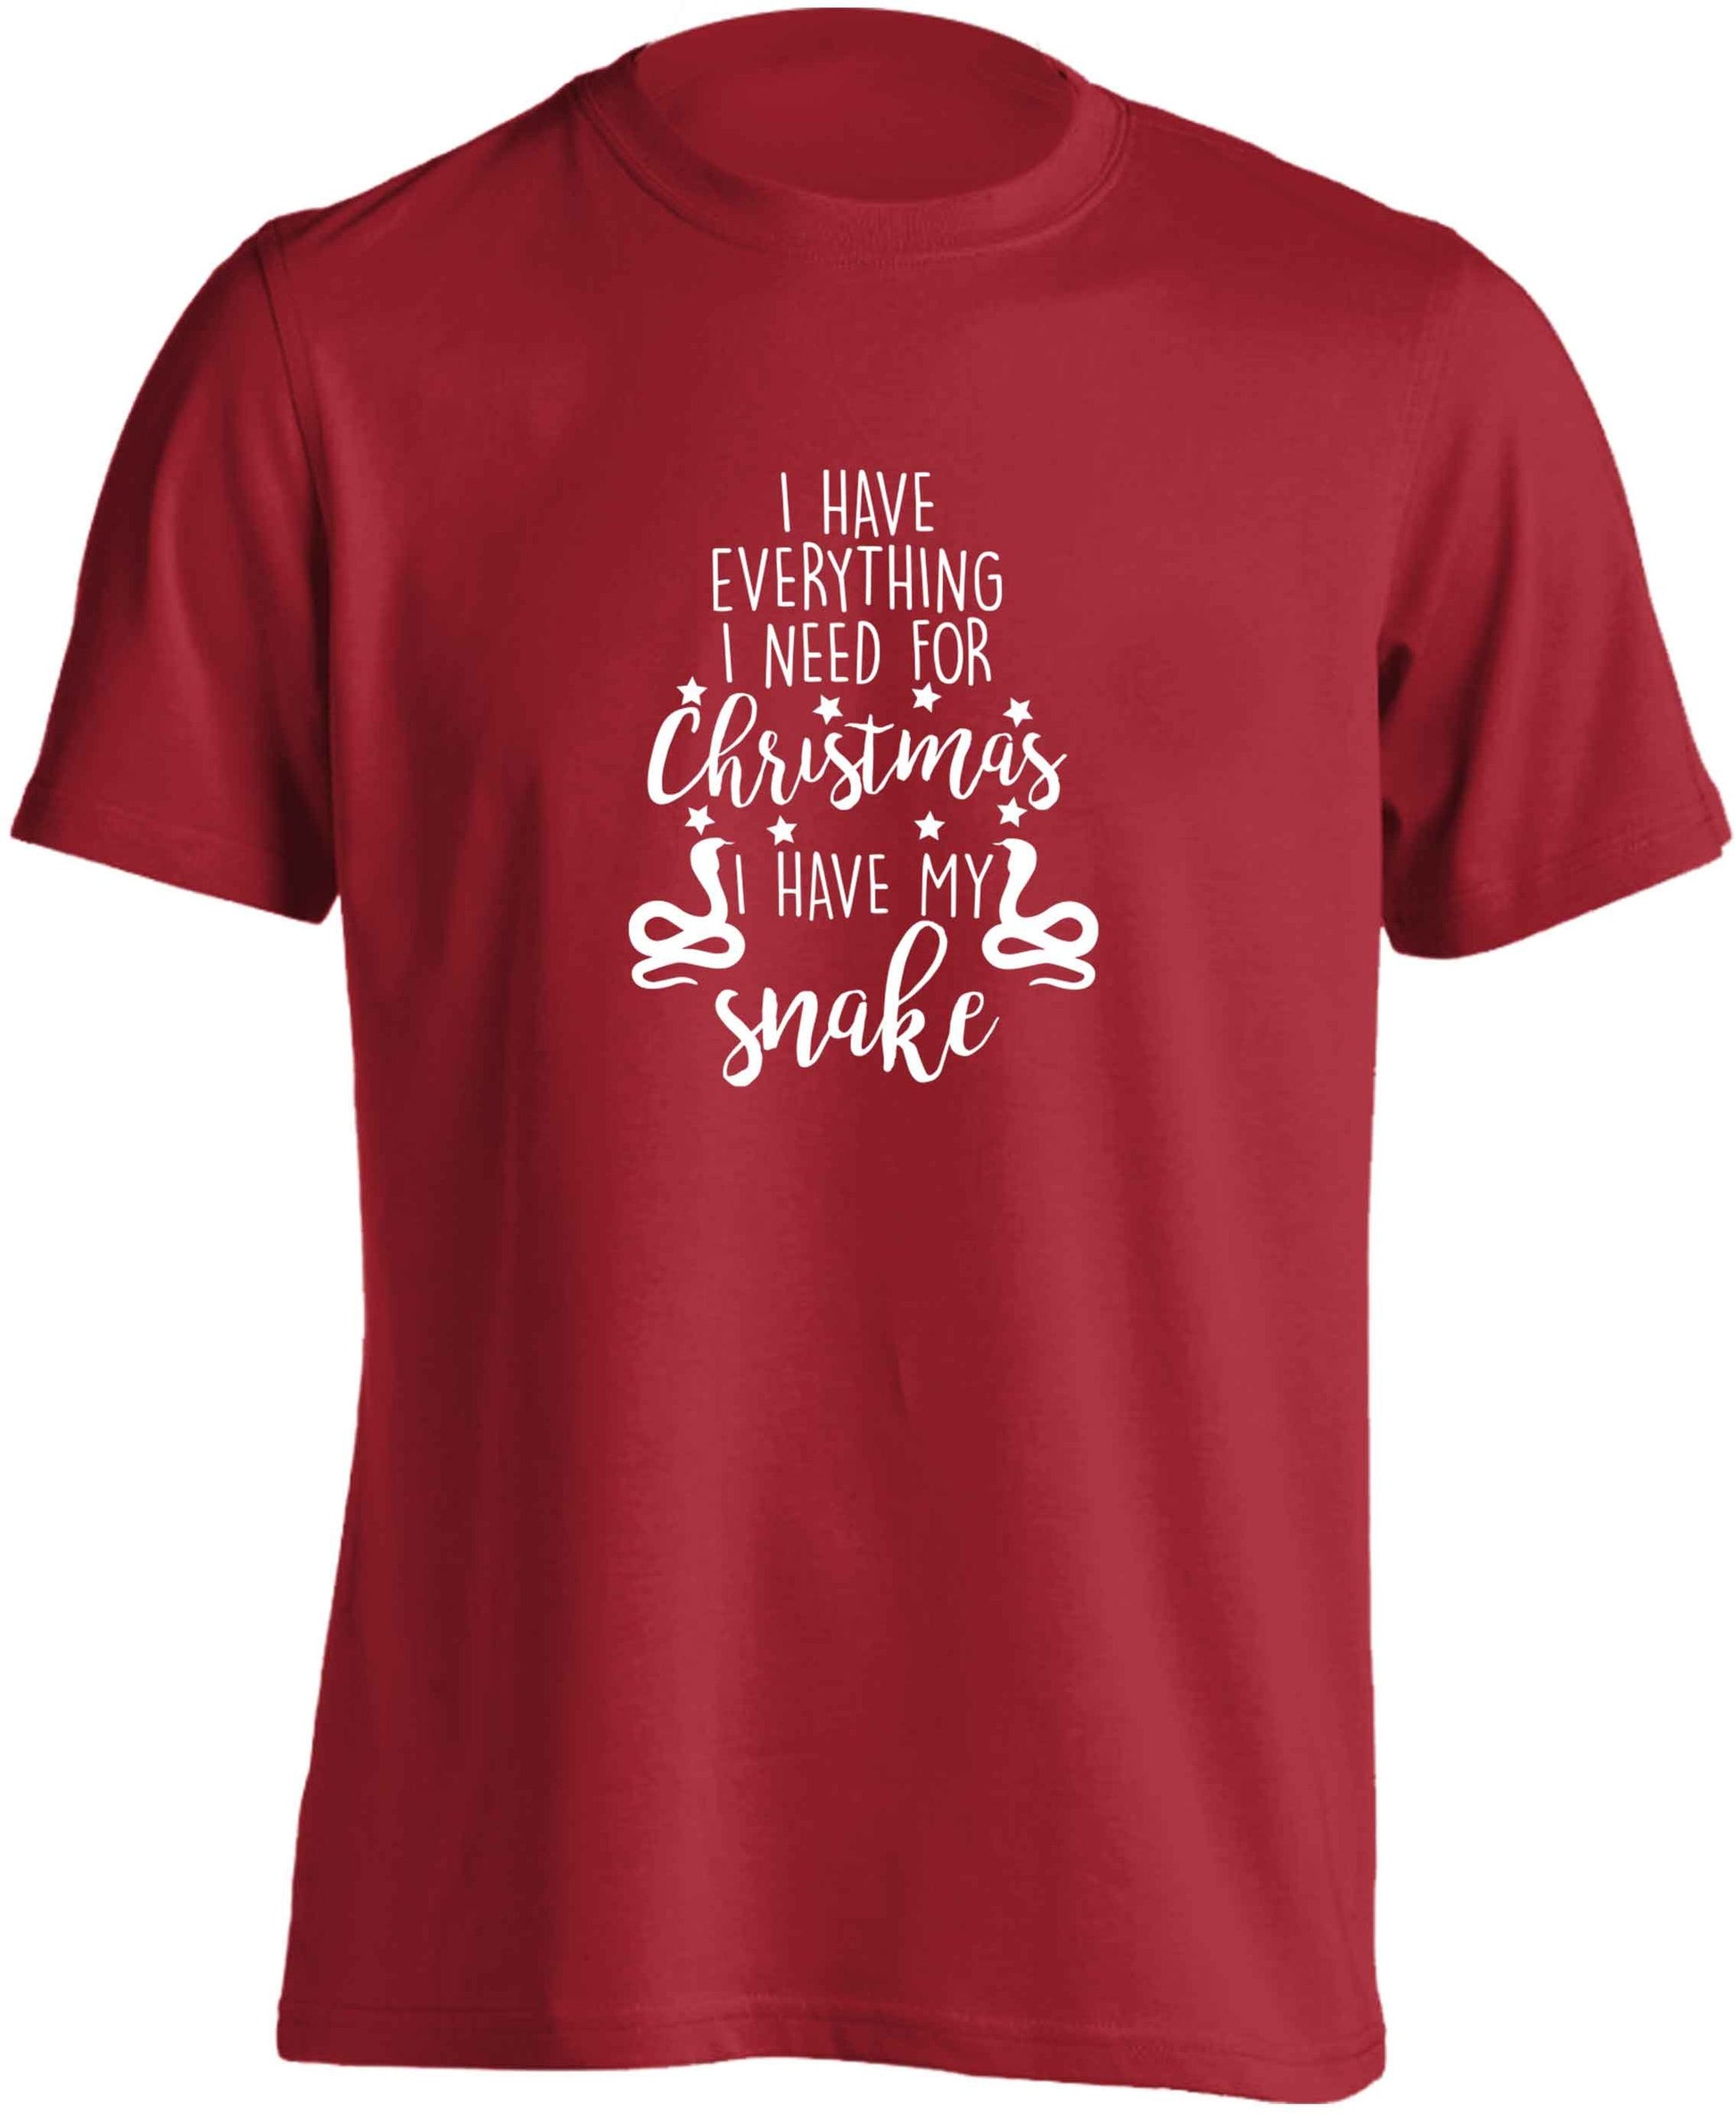 I have everything I need for Christmas I have my snake adults unisex red Tshirt 2XL